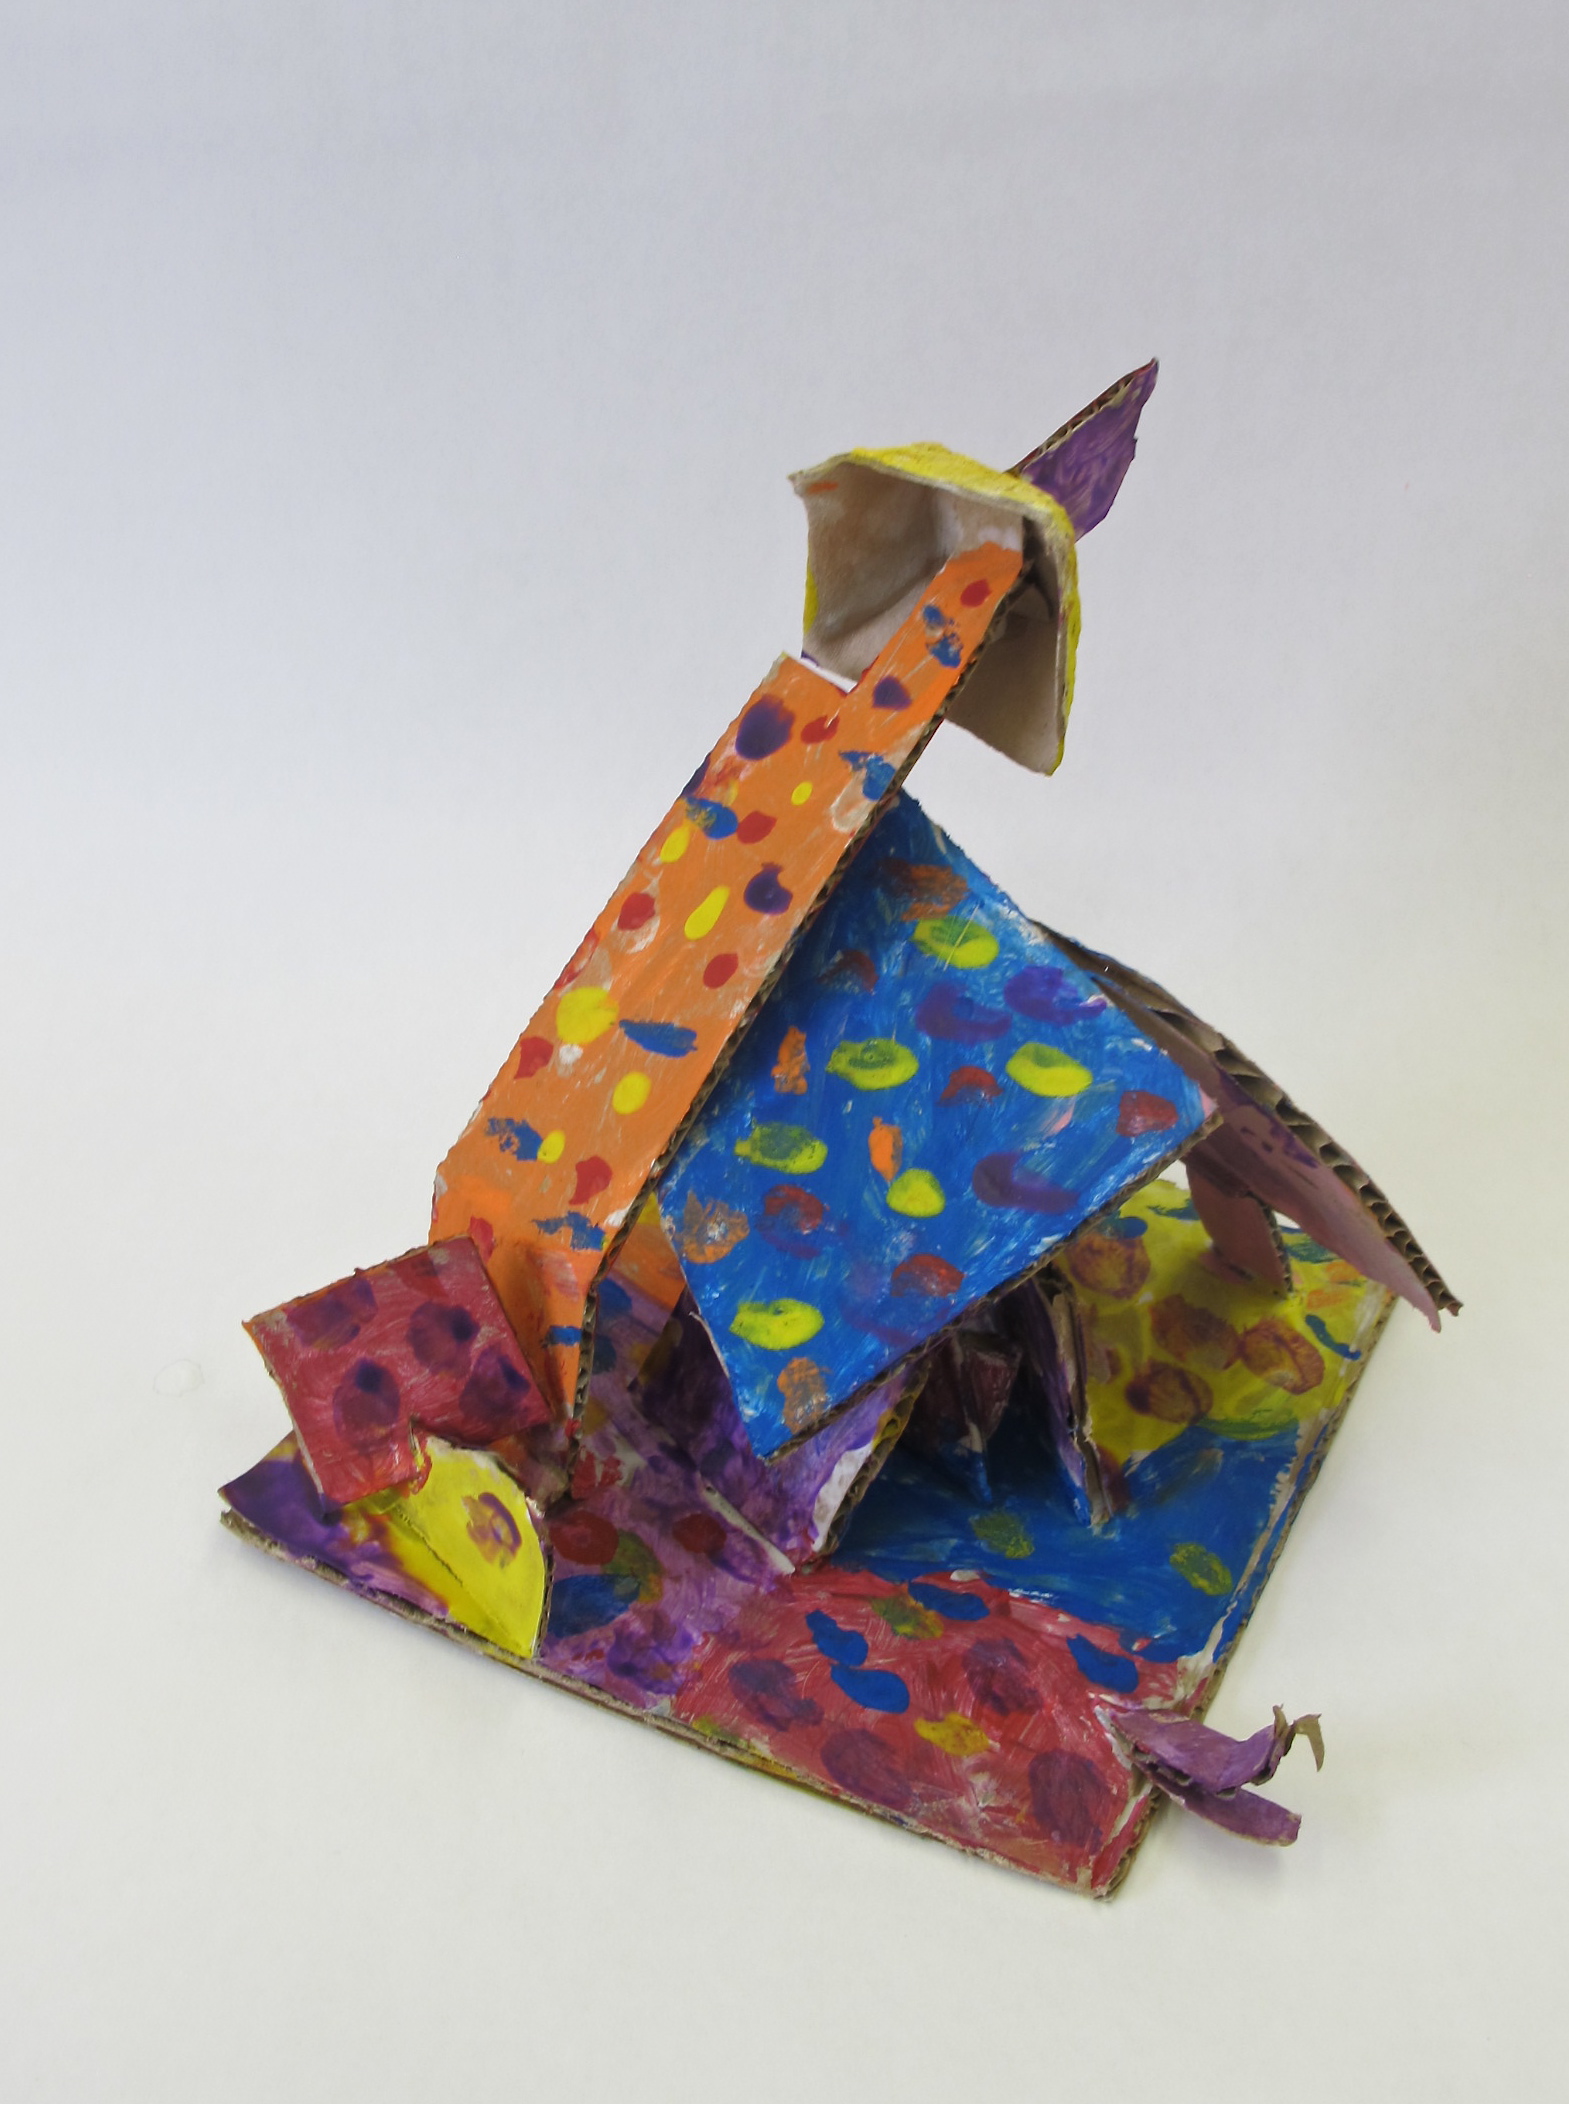 Grade 2/3 Abstract Sculptures | Art Here and There